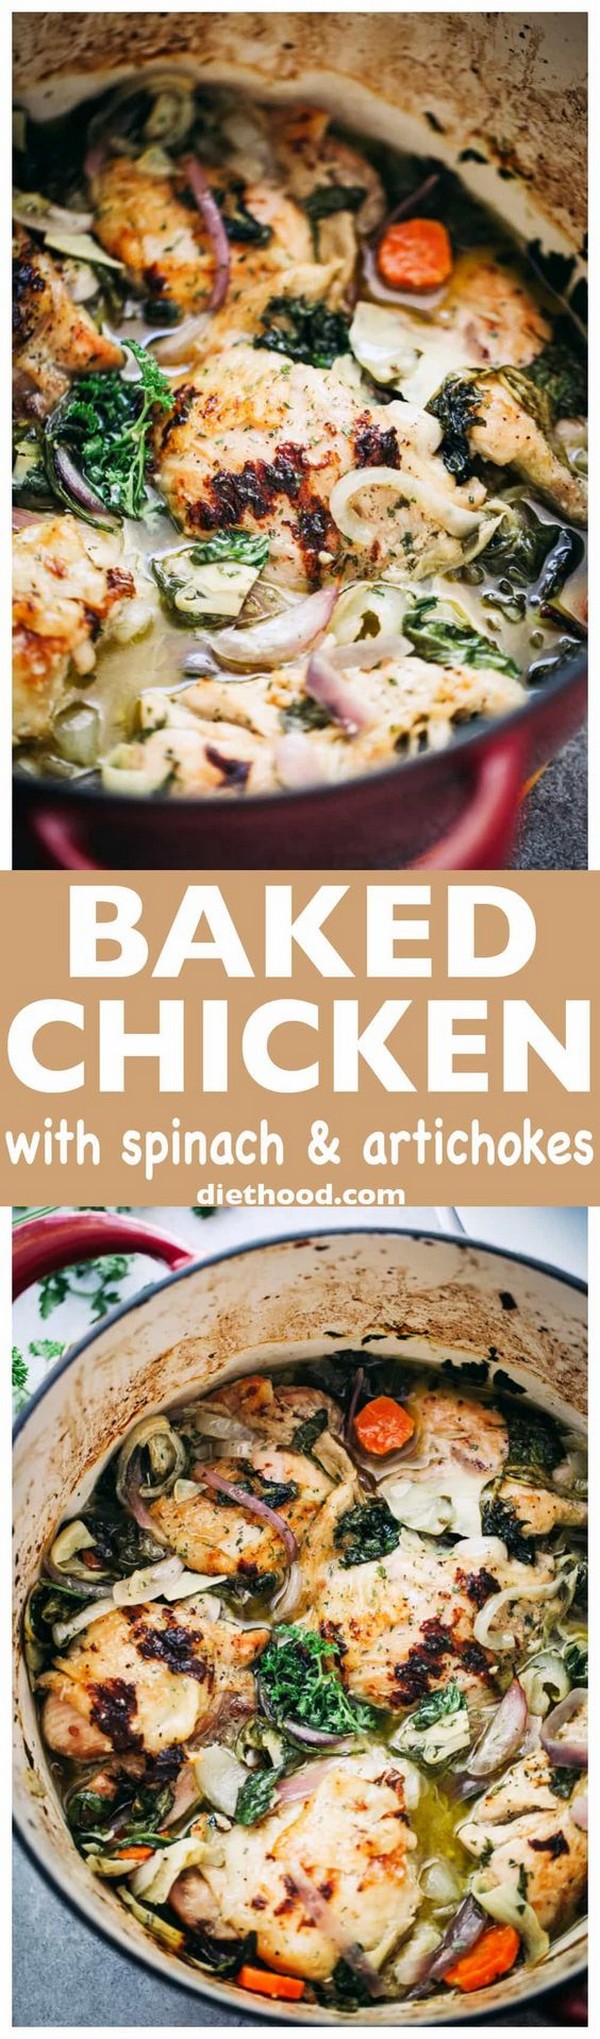 Baked Chicken Recipe With Spinach & Artichokes